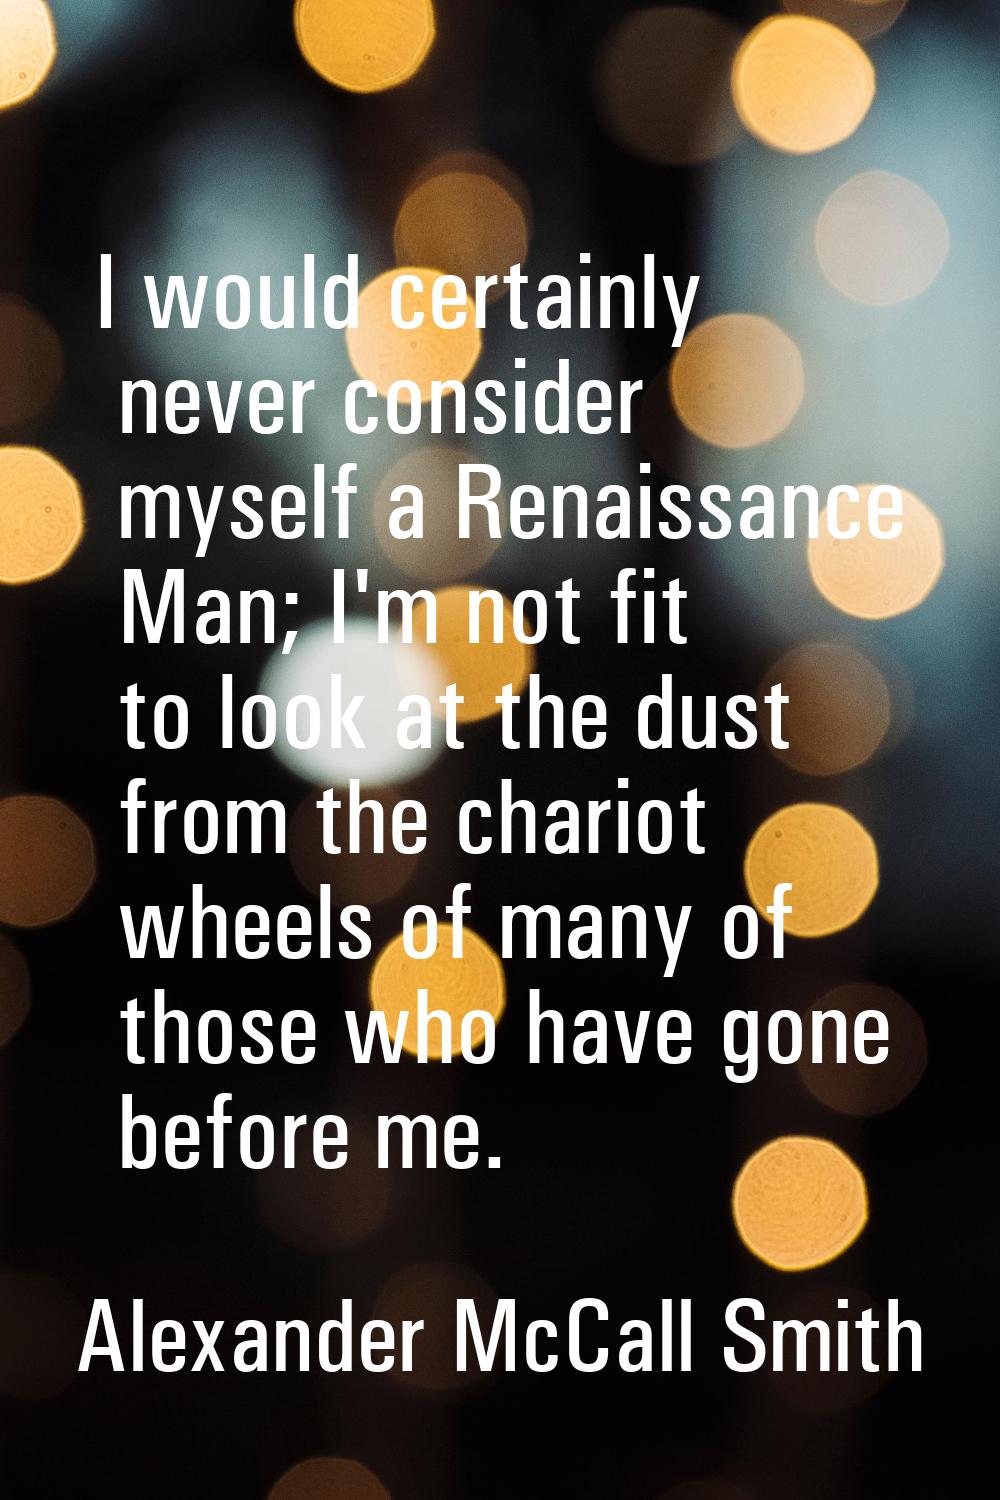 I would certainly never consider myself a Renaissance Man; I'm not fit to look at the dust from the